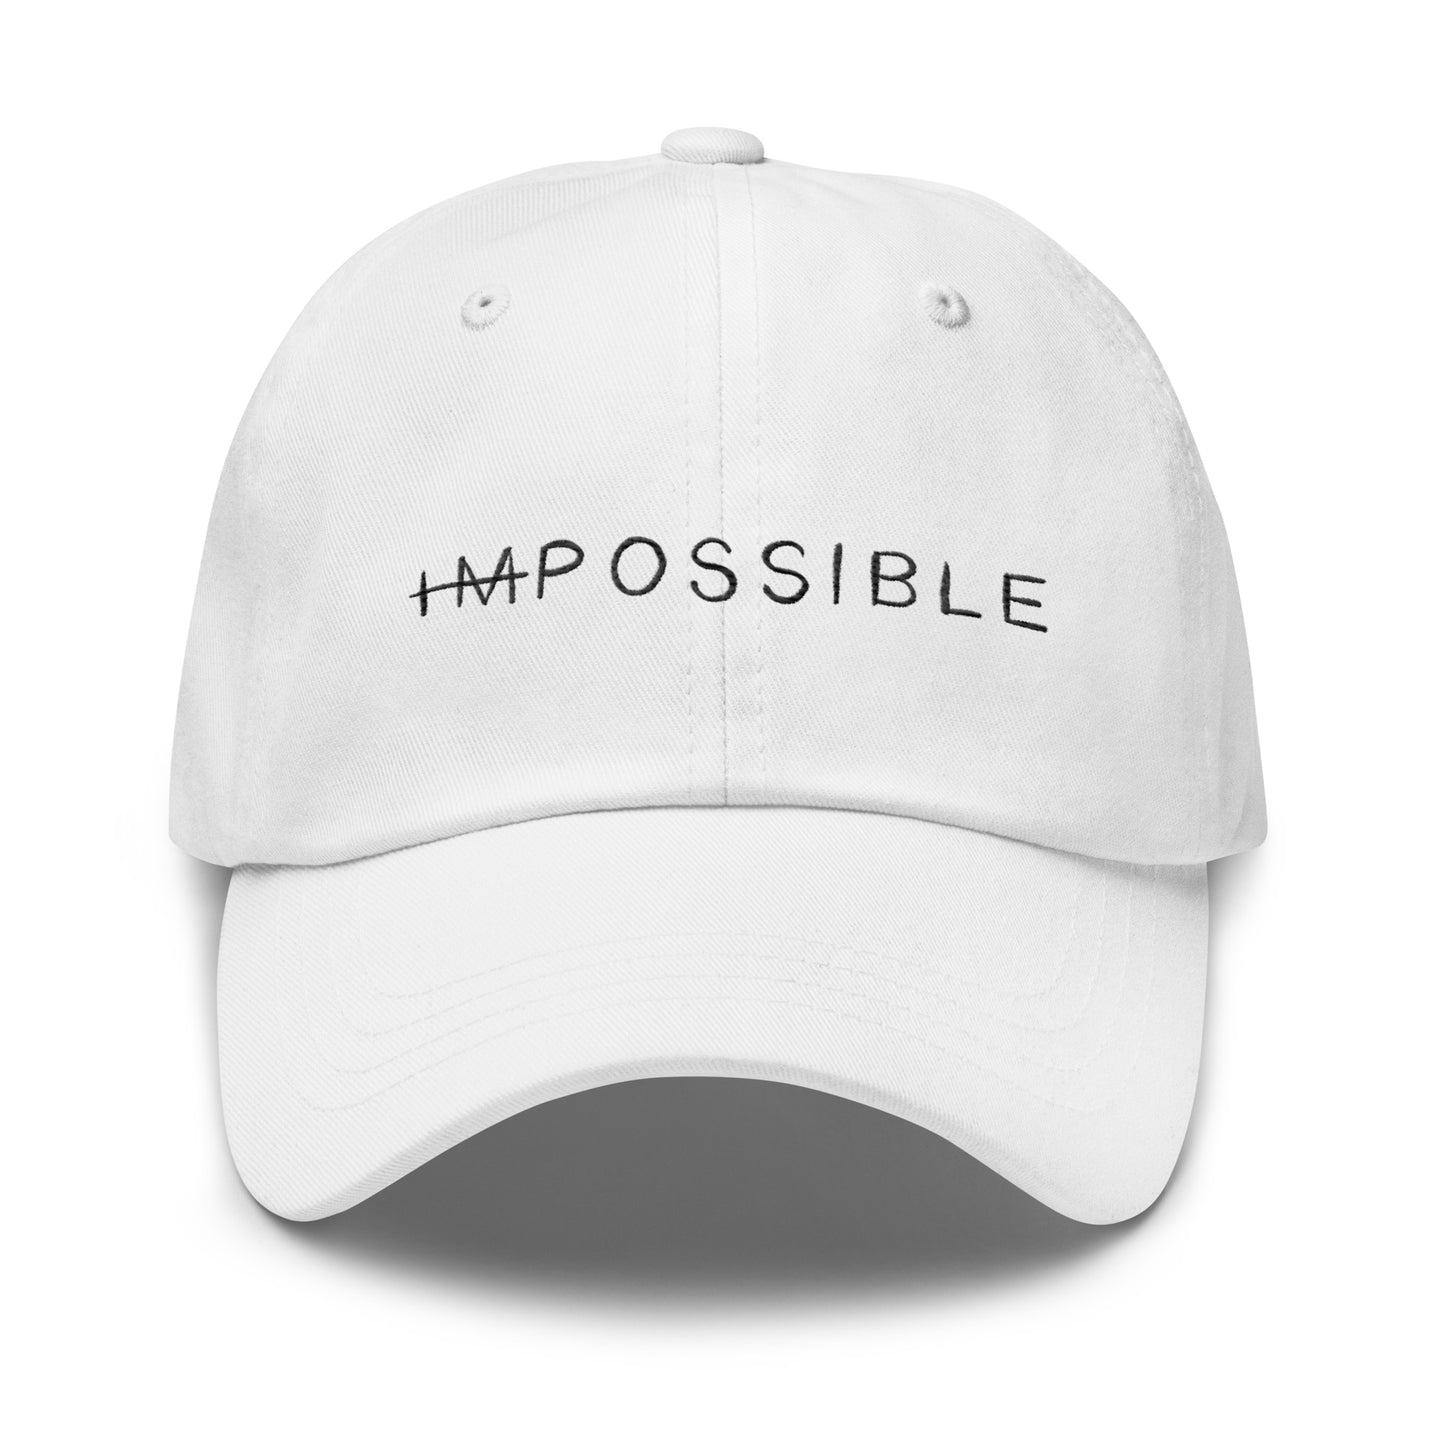 “IM- POSSIBLE”  hat